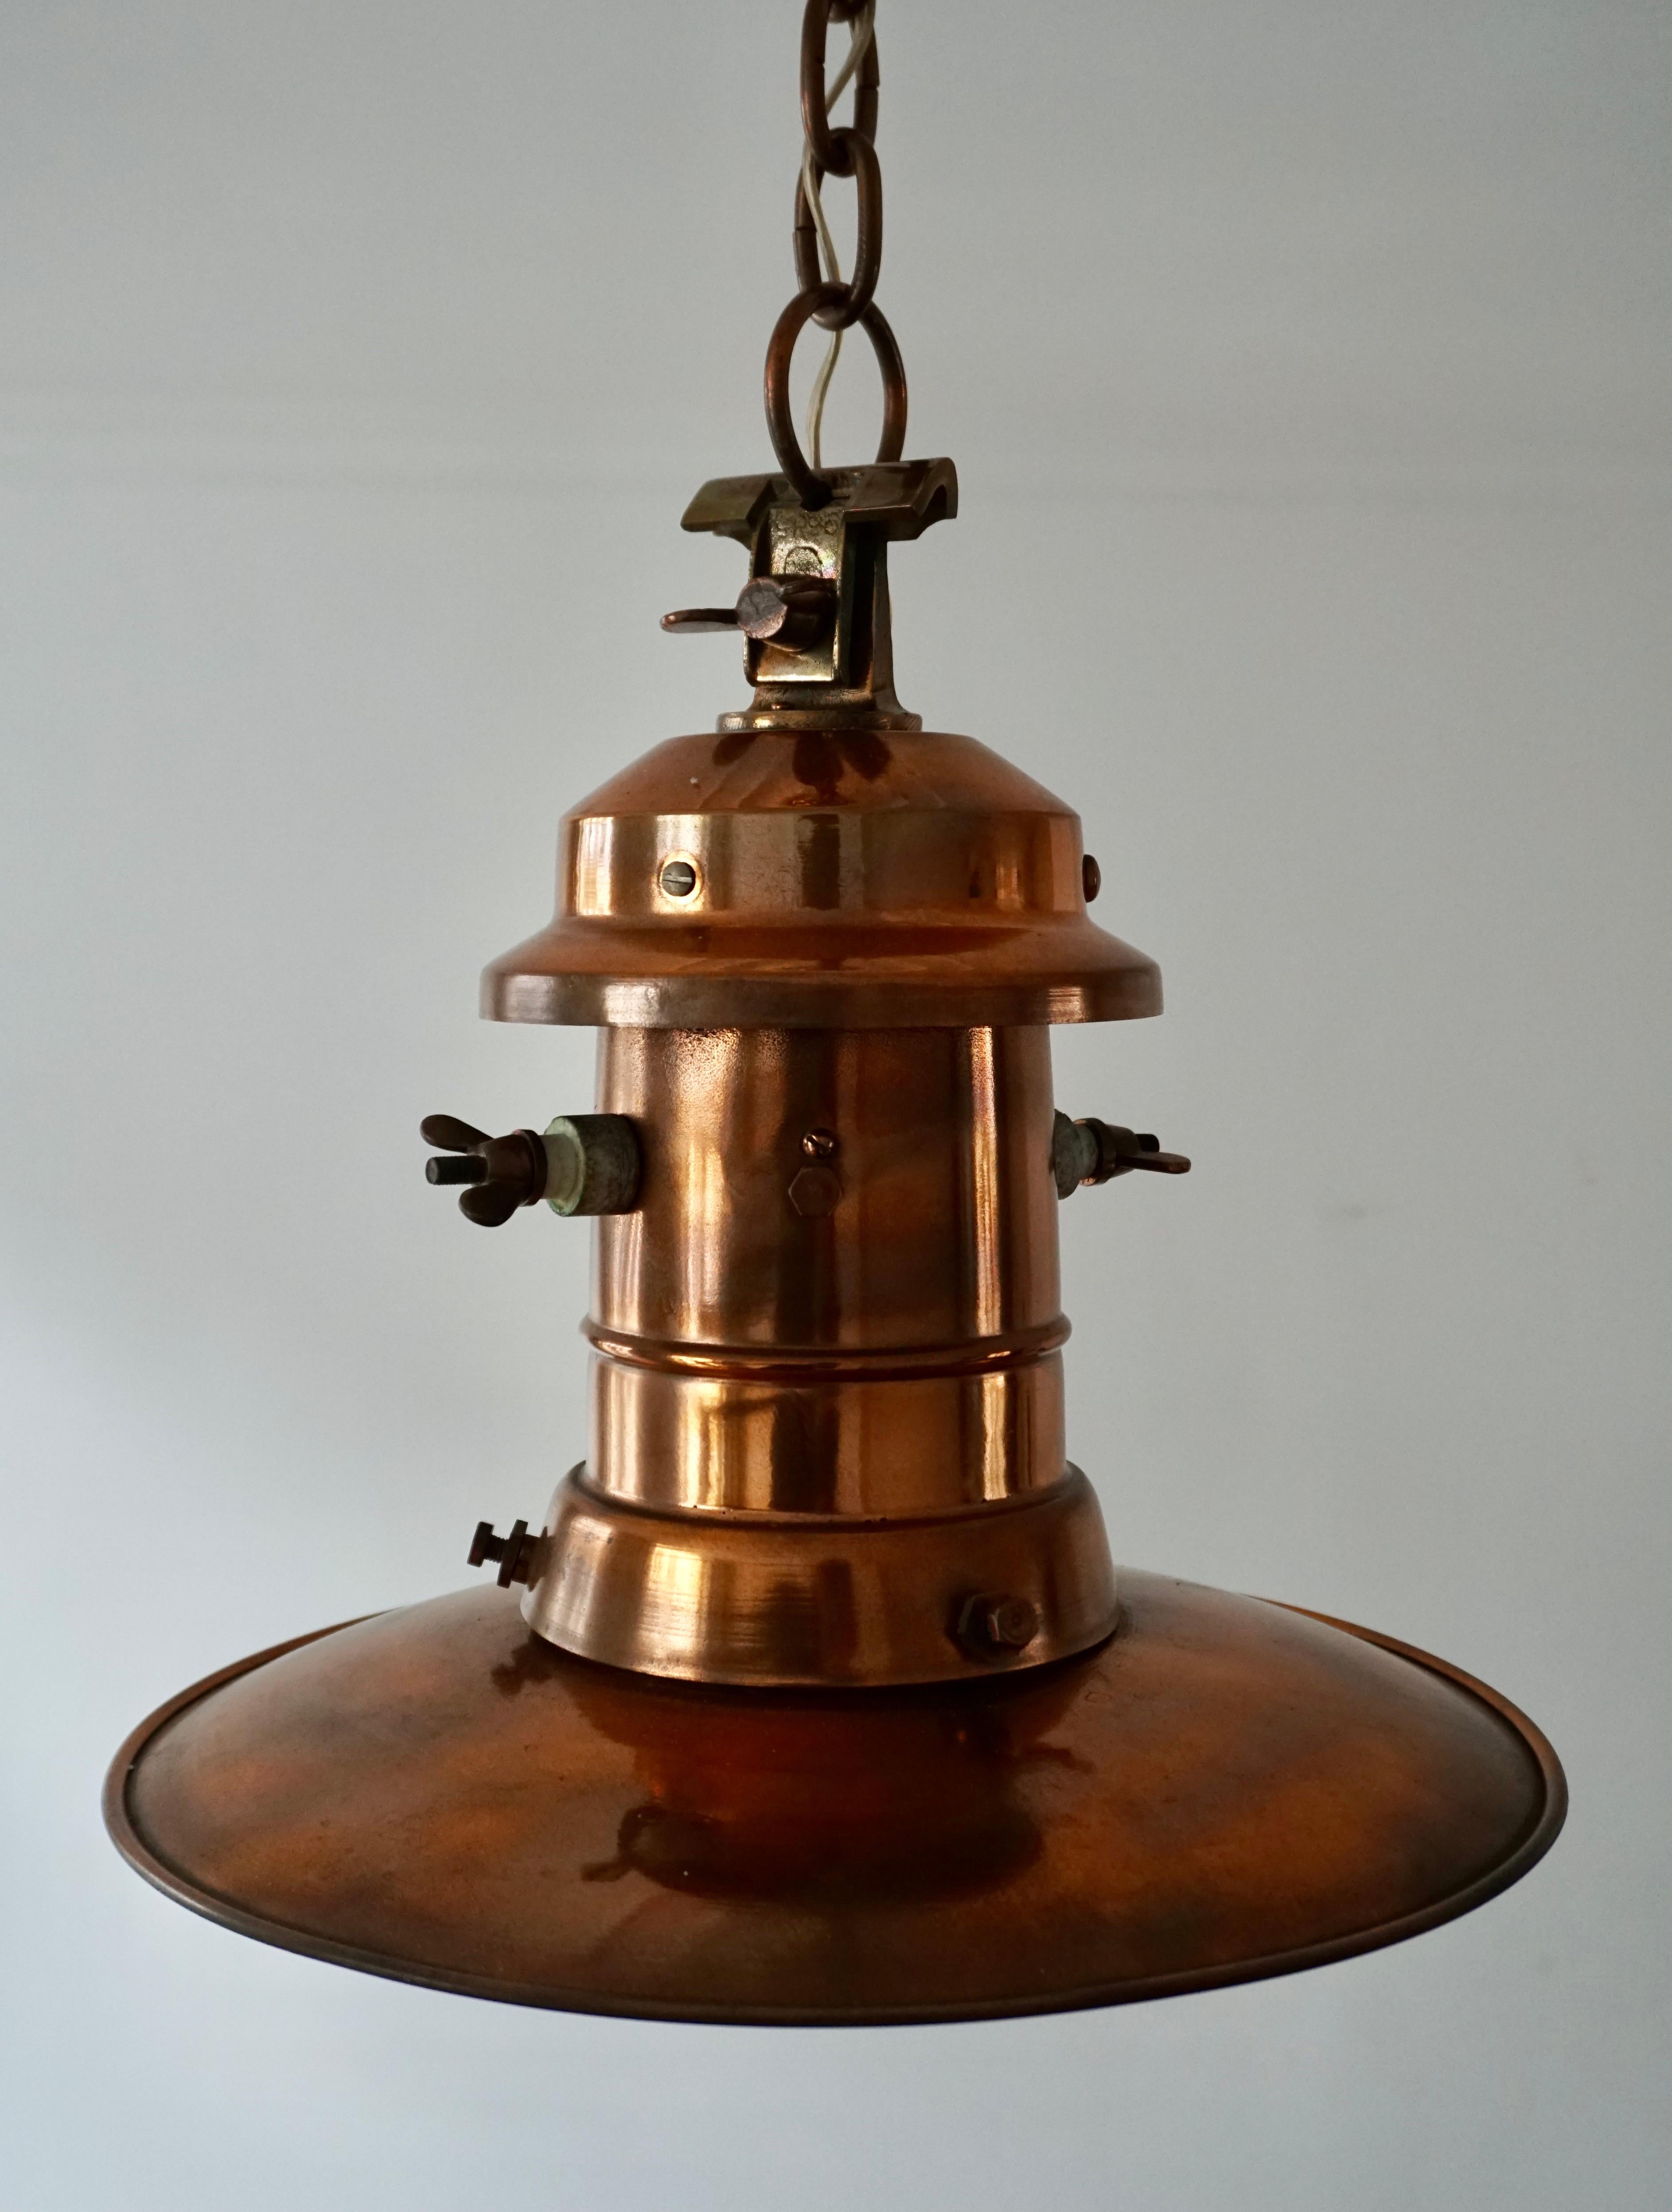 Beautiful antique street gas lantern converted to electric. 

It does not matter whether you are decorating an Art Deco, a Mid-Century Modern or a contemporary home or office, if you have the right space for it then this stunning, timeless and